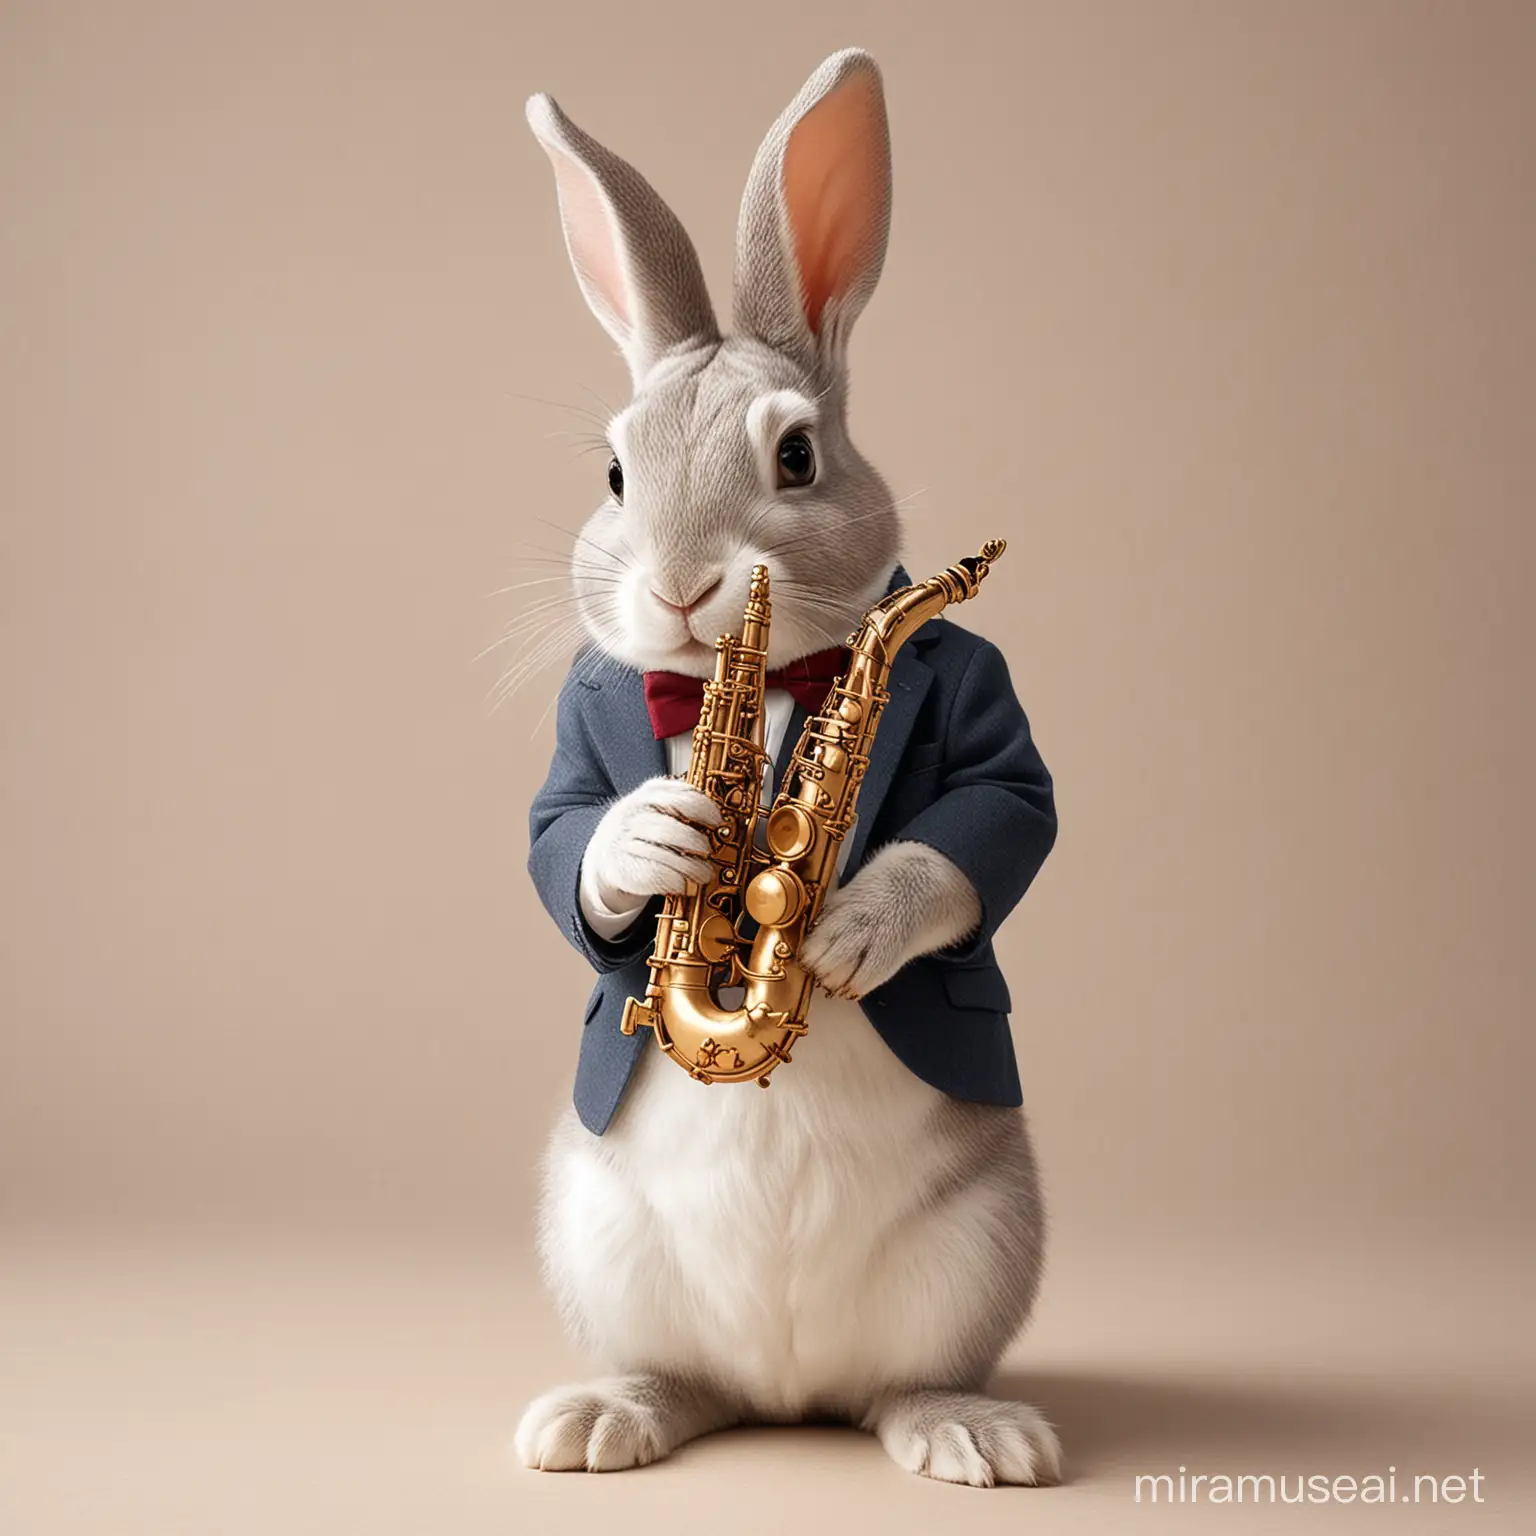 SaxophonePlaying Rabbit in a Jazzy Jam Session